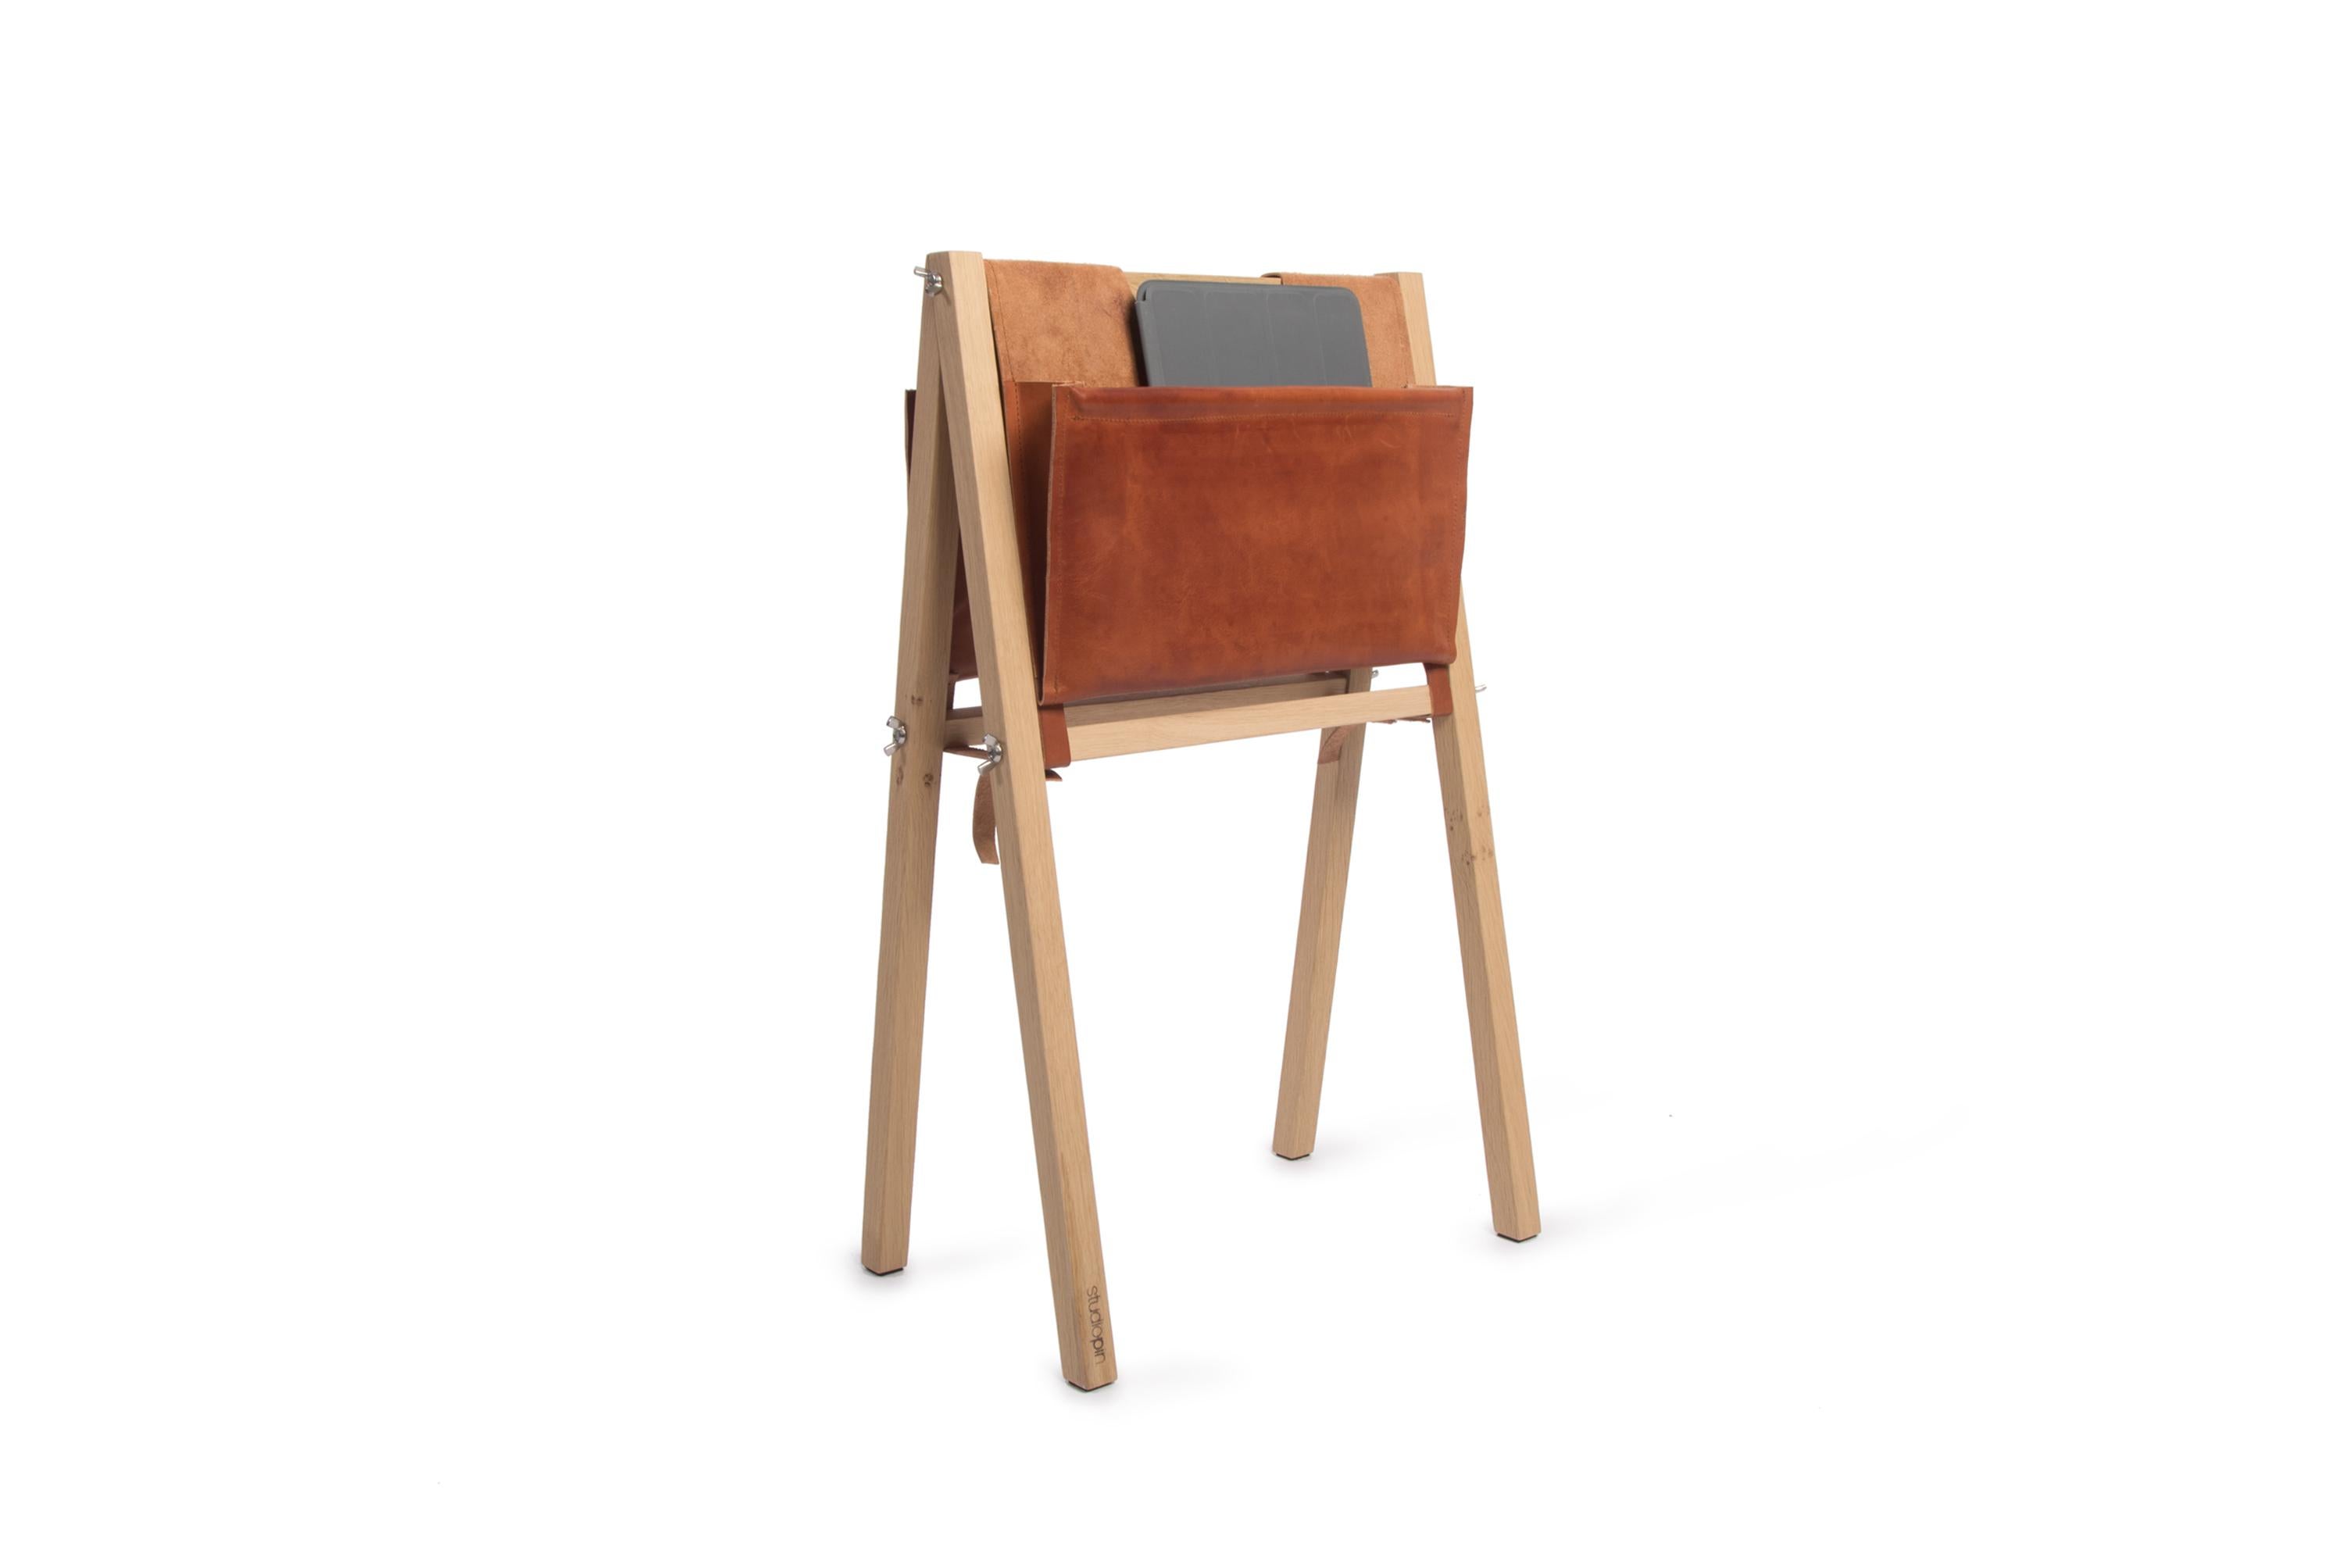 Leather Stan Magazine Rack by Studio Pin
Dimensions: W 42 x D 26 x H 67.2 cm
Materials: solid oak, leather.
Weight: 2.5 Kg.

Stan is a magazine rack. The oak frame perfectly matches the 3 types of bags in the colors light brown and dark grey of